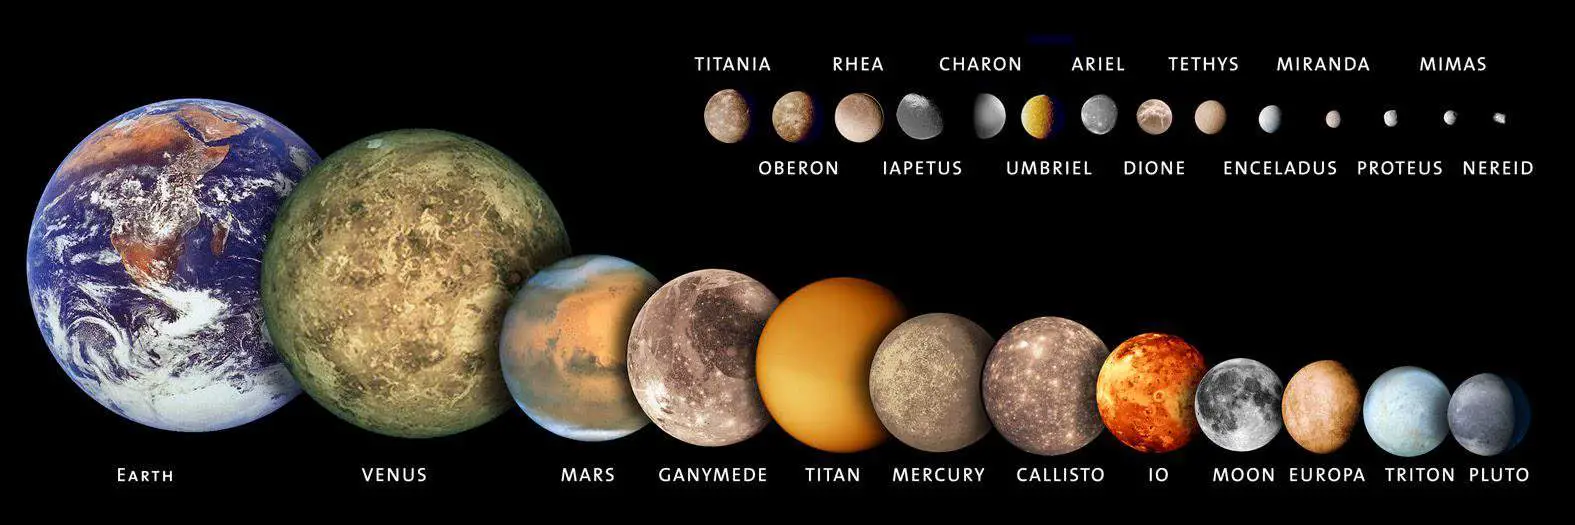 The moons of the Solar System